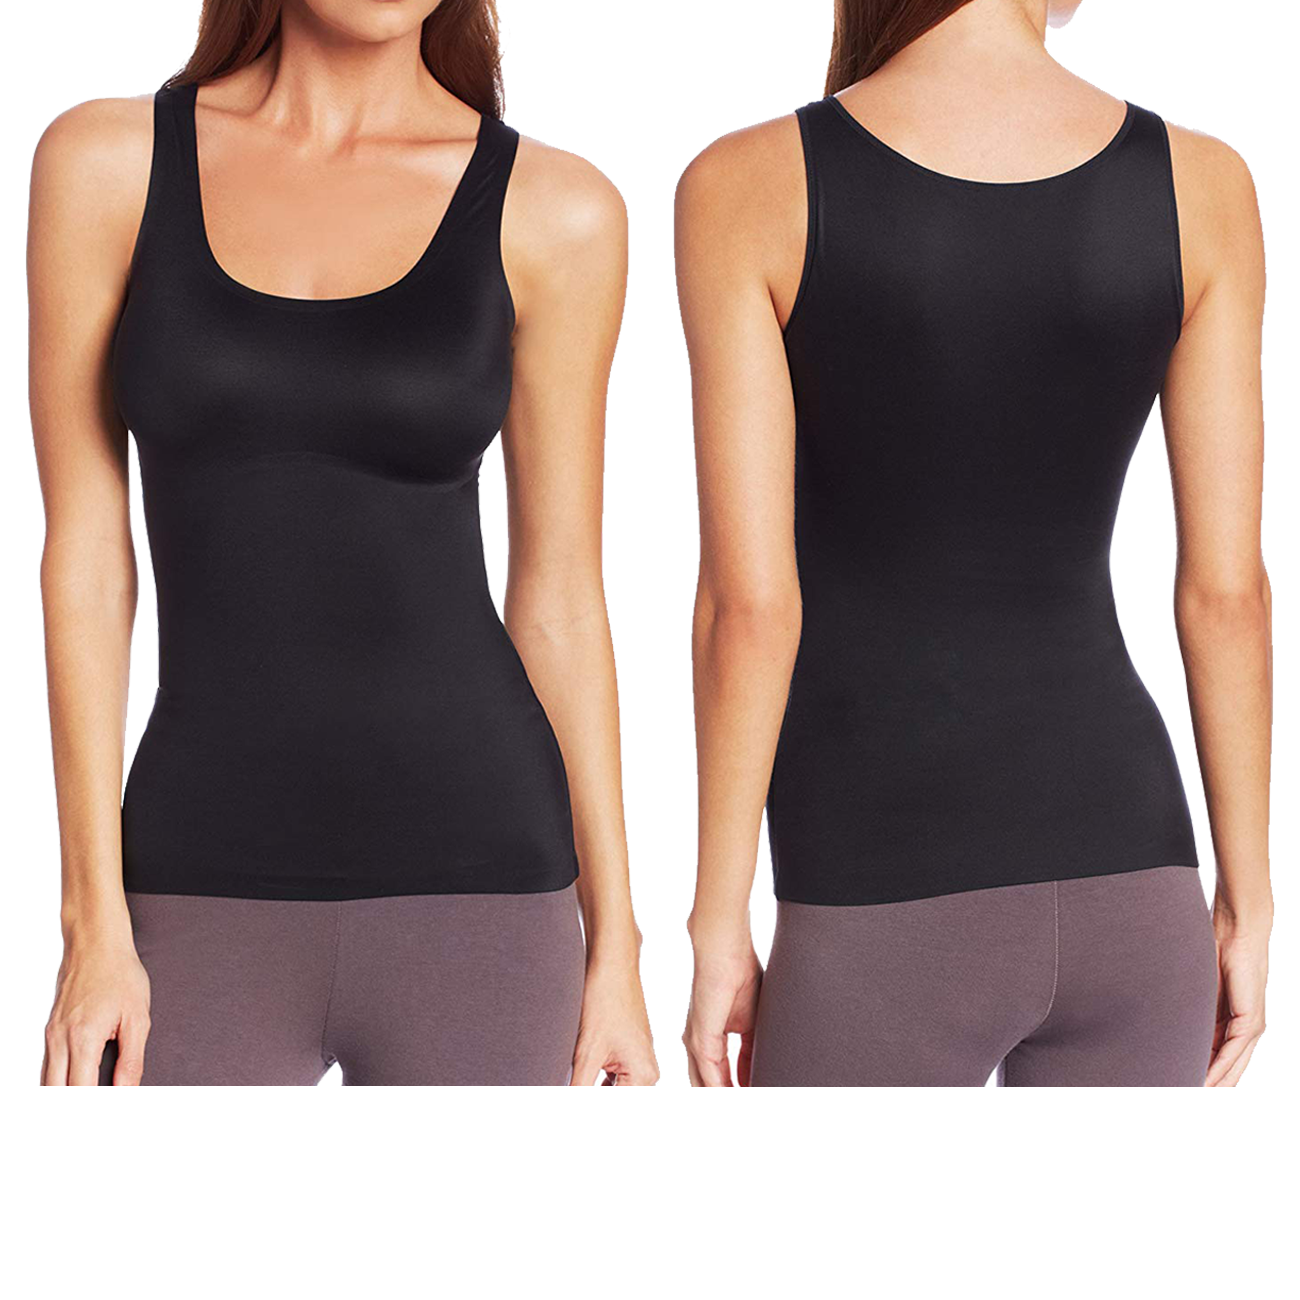 Women's Slim Compression Tank Top – Extreme Fit